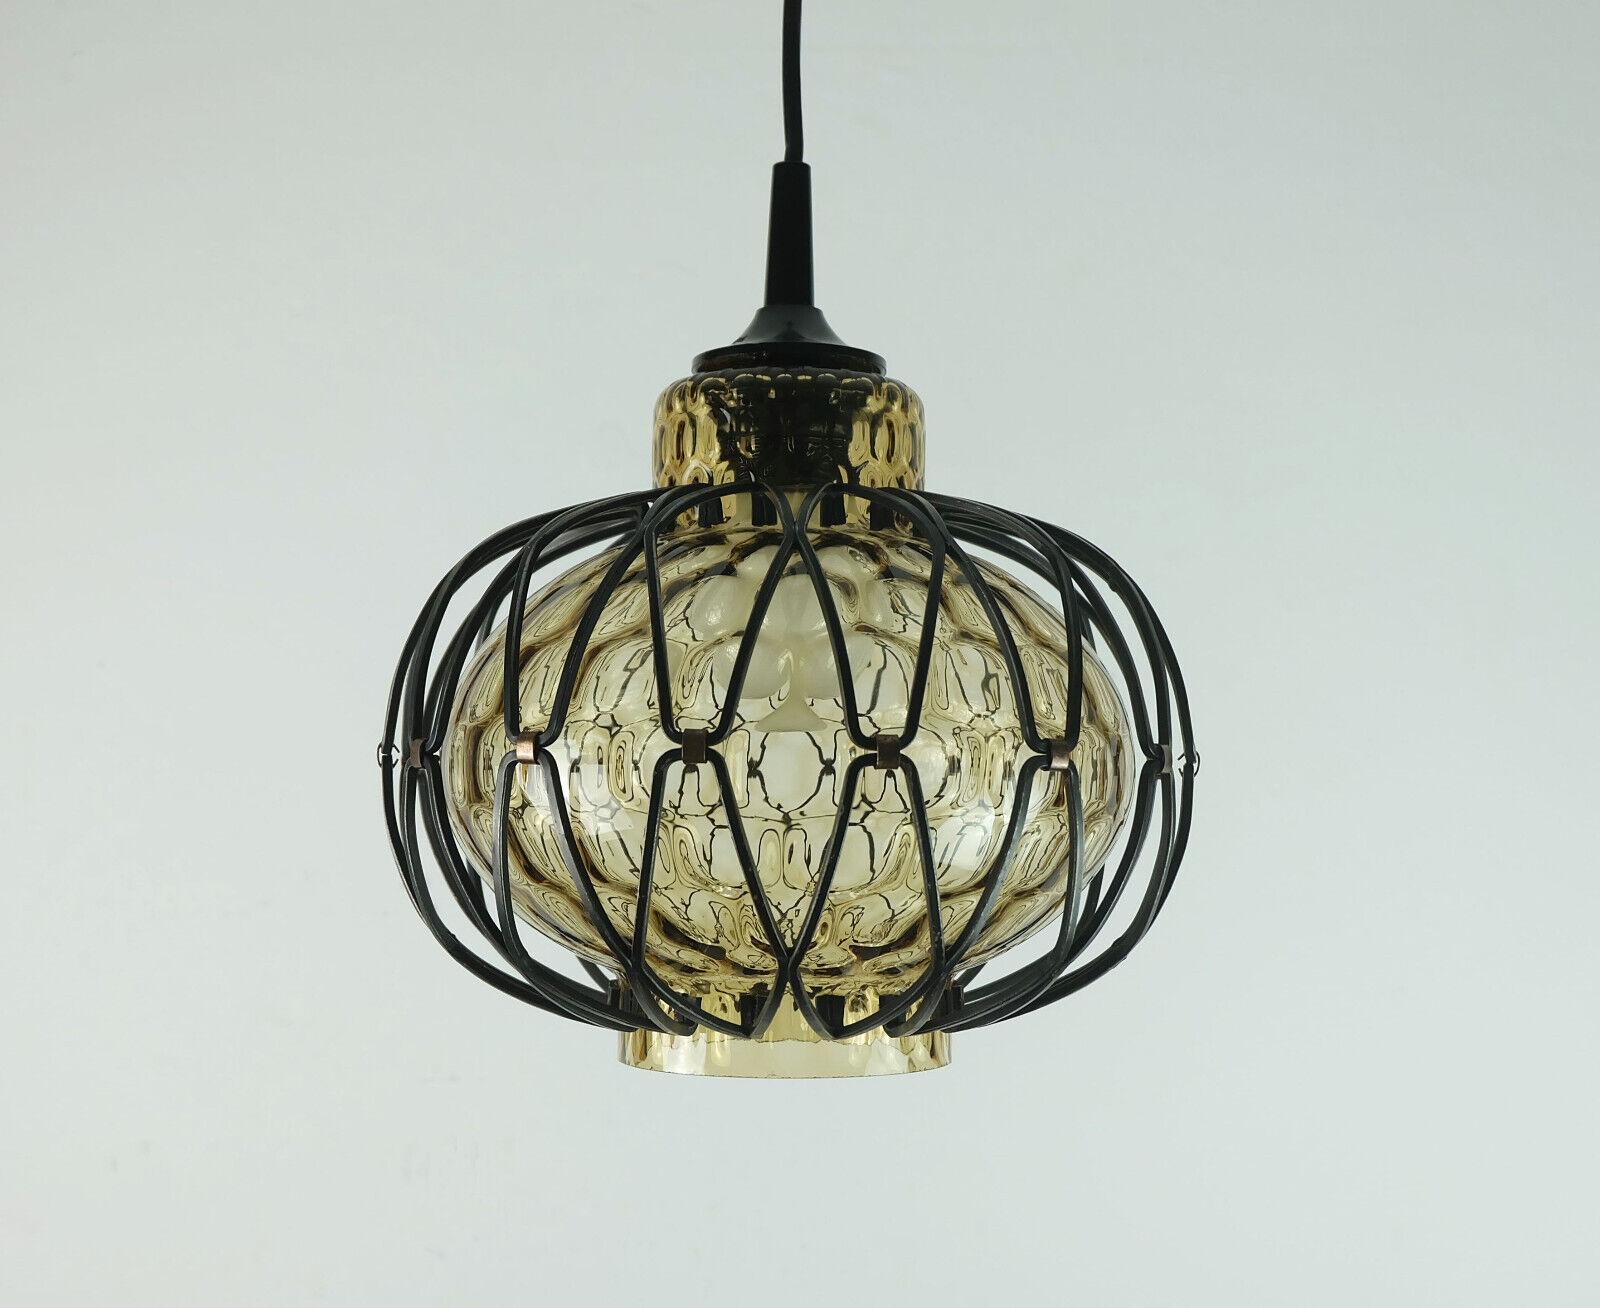 Beautiful small pendant light from the 1960s/70s. The shade is made of smoked glass with a honeycomb structure. The frame around the glass is made of black painted metal and small copper elements. Black electric wire and black canopy. Holds one E27